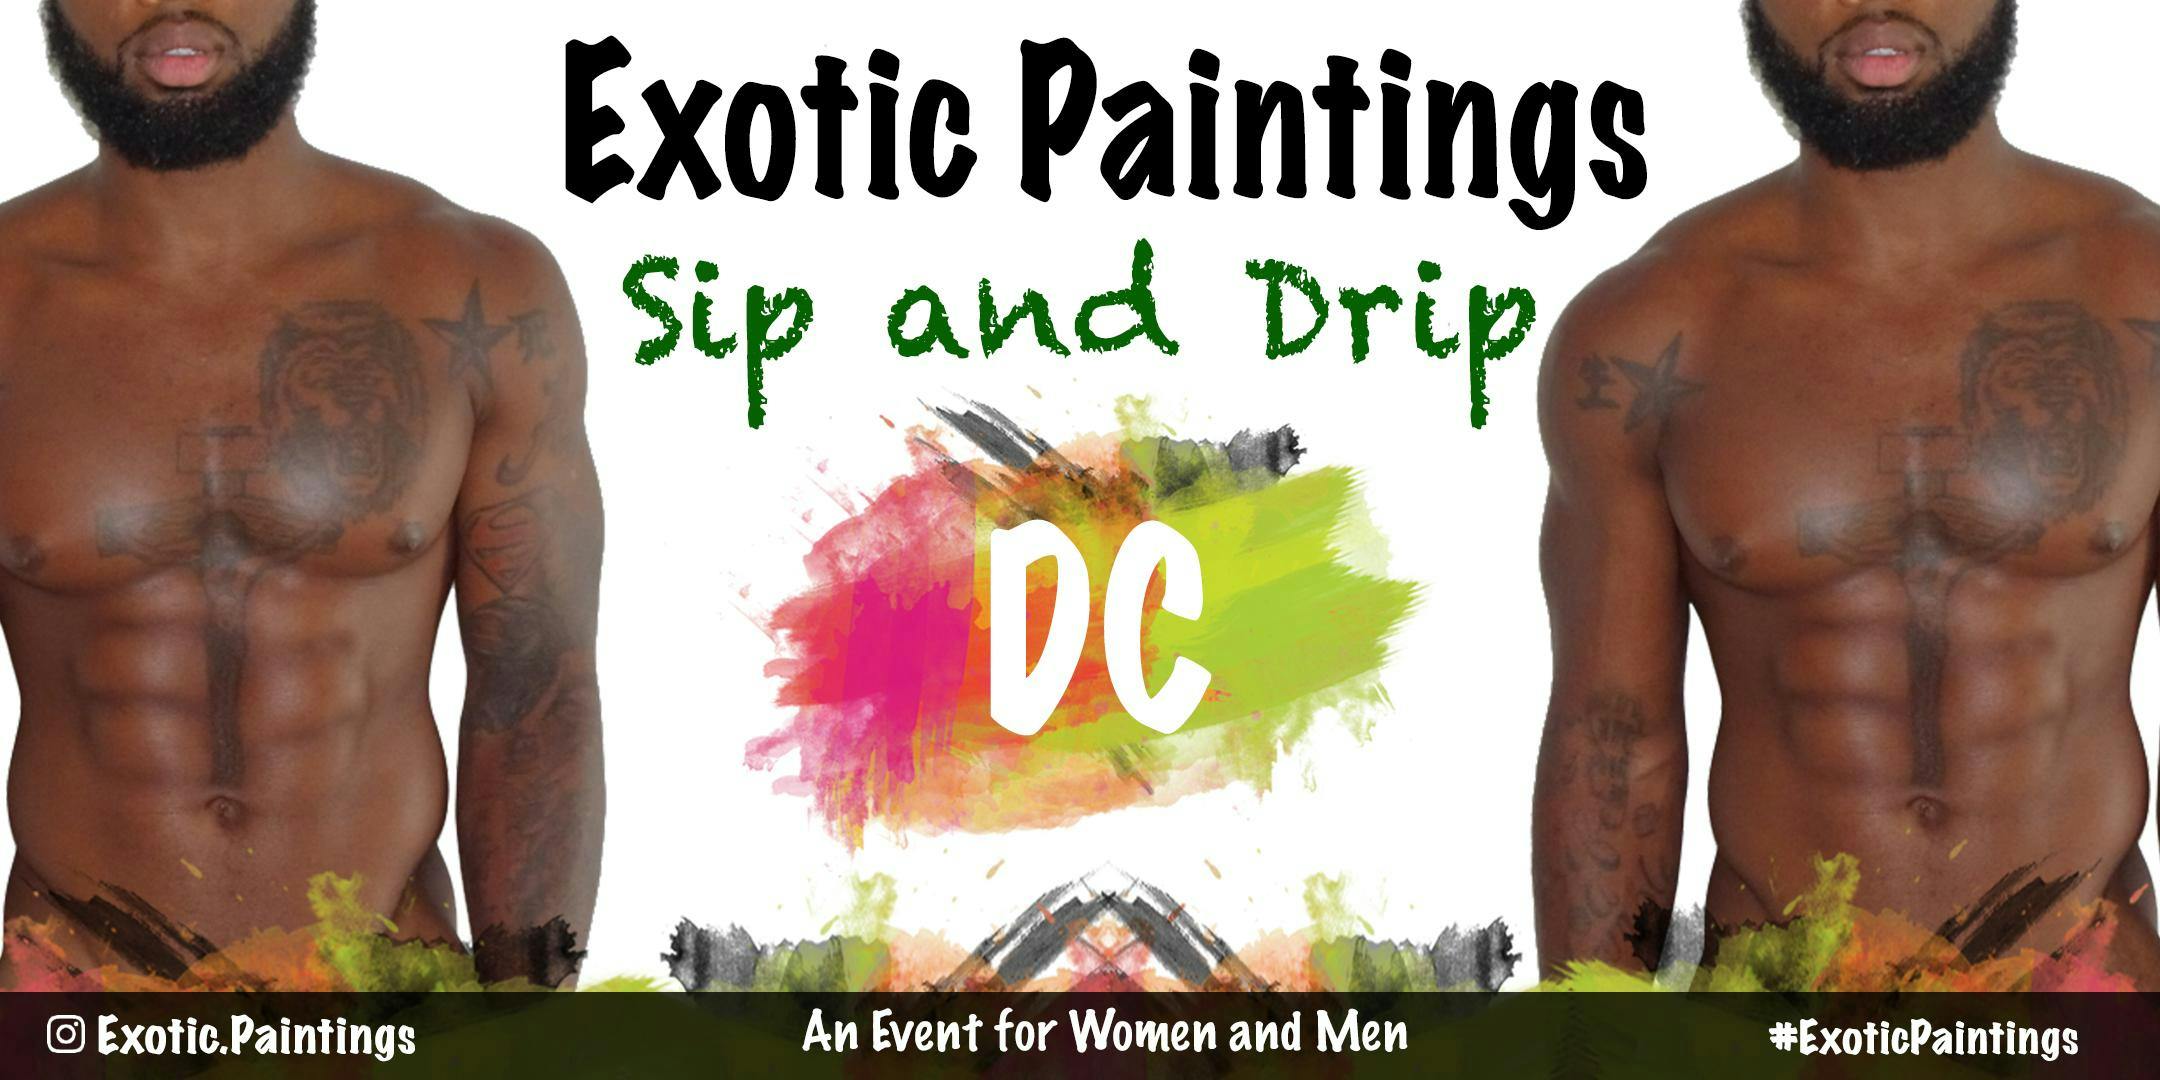 Exotic paintings sip and paint